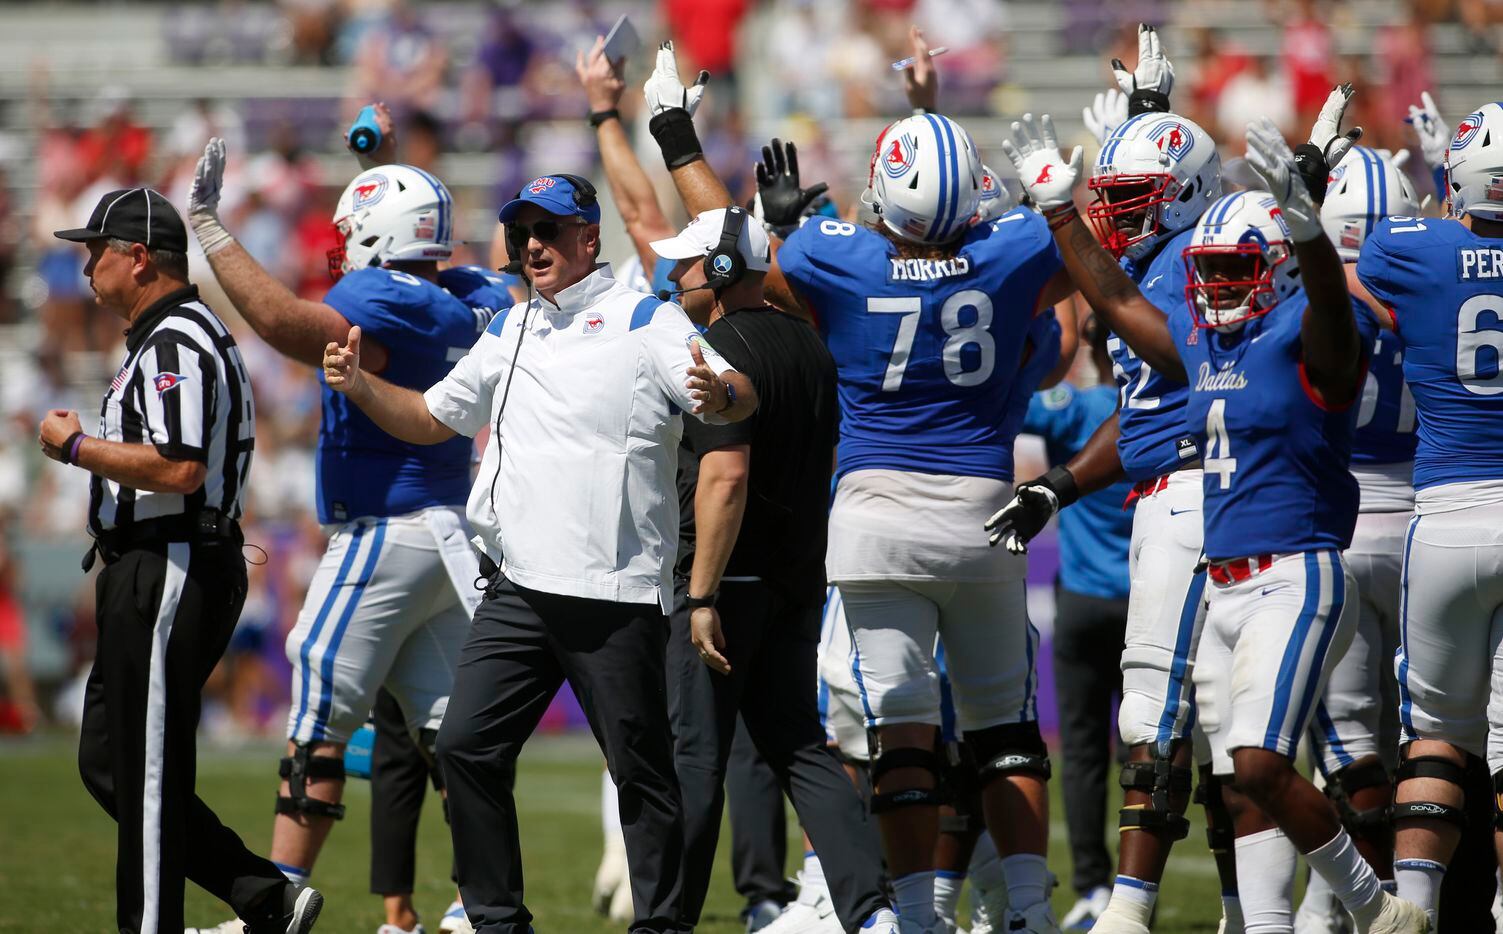 SMU coach Sonny Dykes leads his team's effort to question a call after the replay was shown...